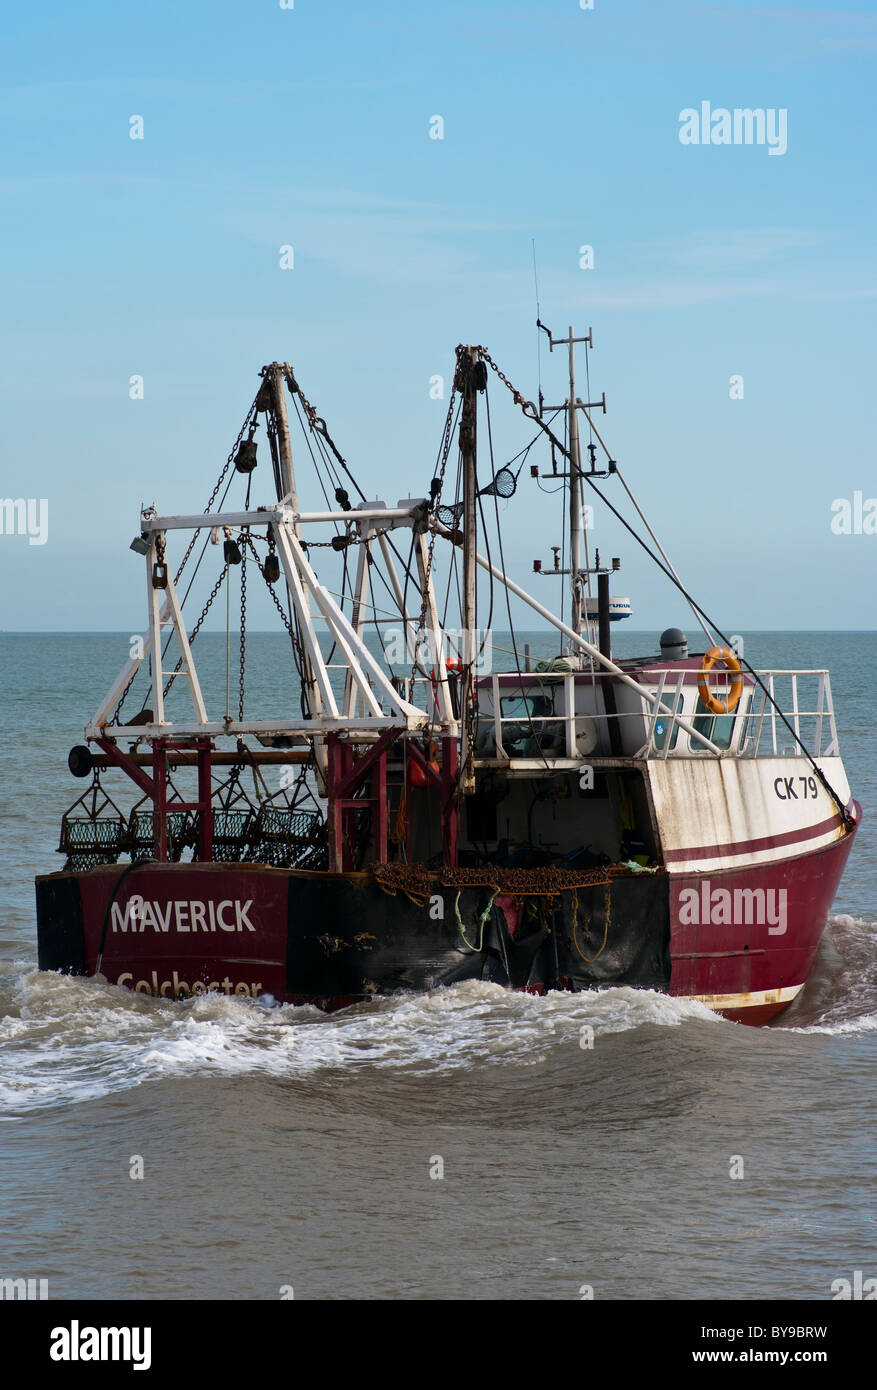 https://c8.alamy.com/comp/BY9BRW/commercial-fishing-trawler-boat-entering-the-english-channel-from-BY9BRW.jpg